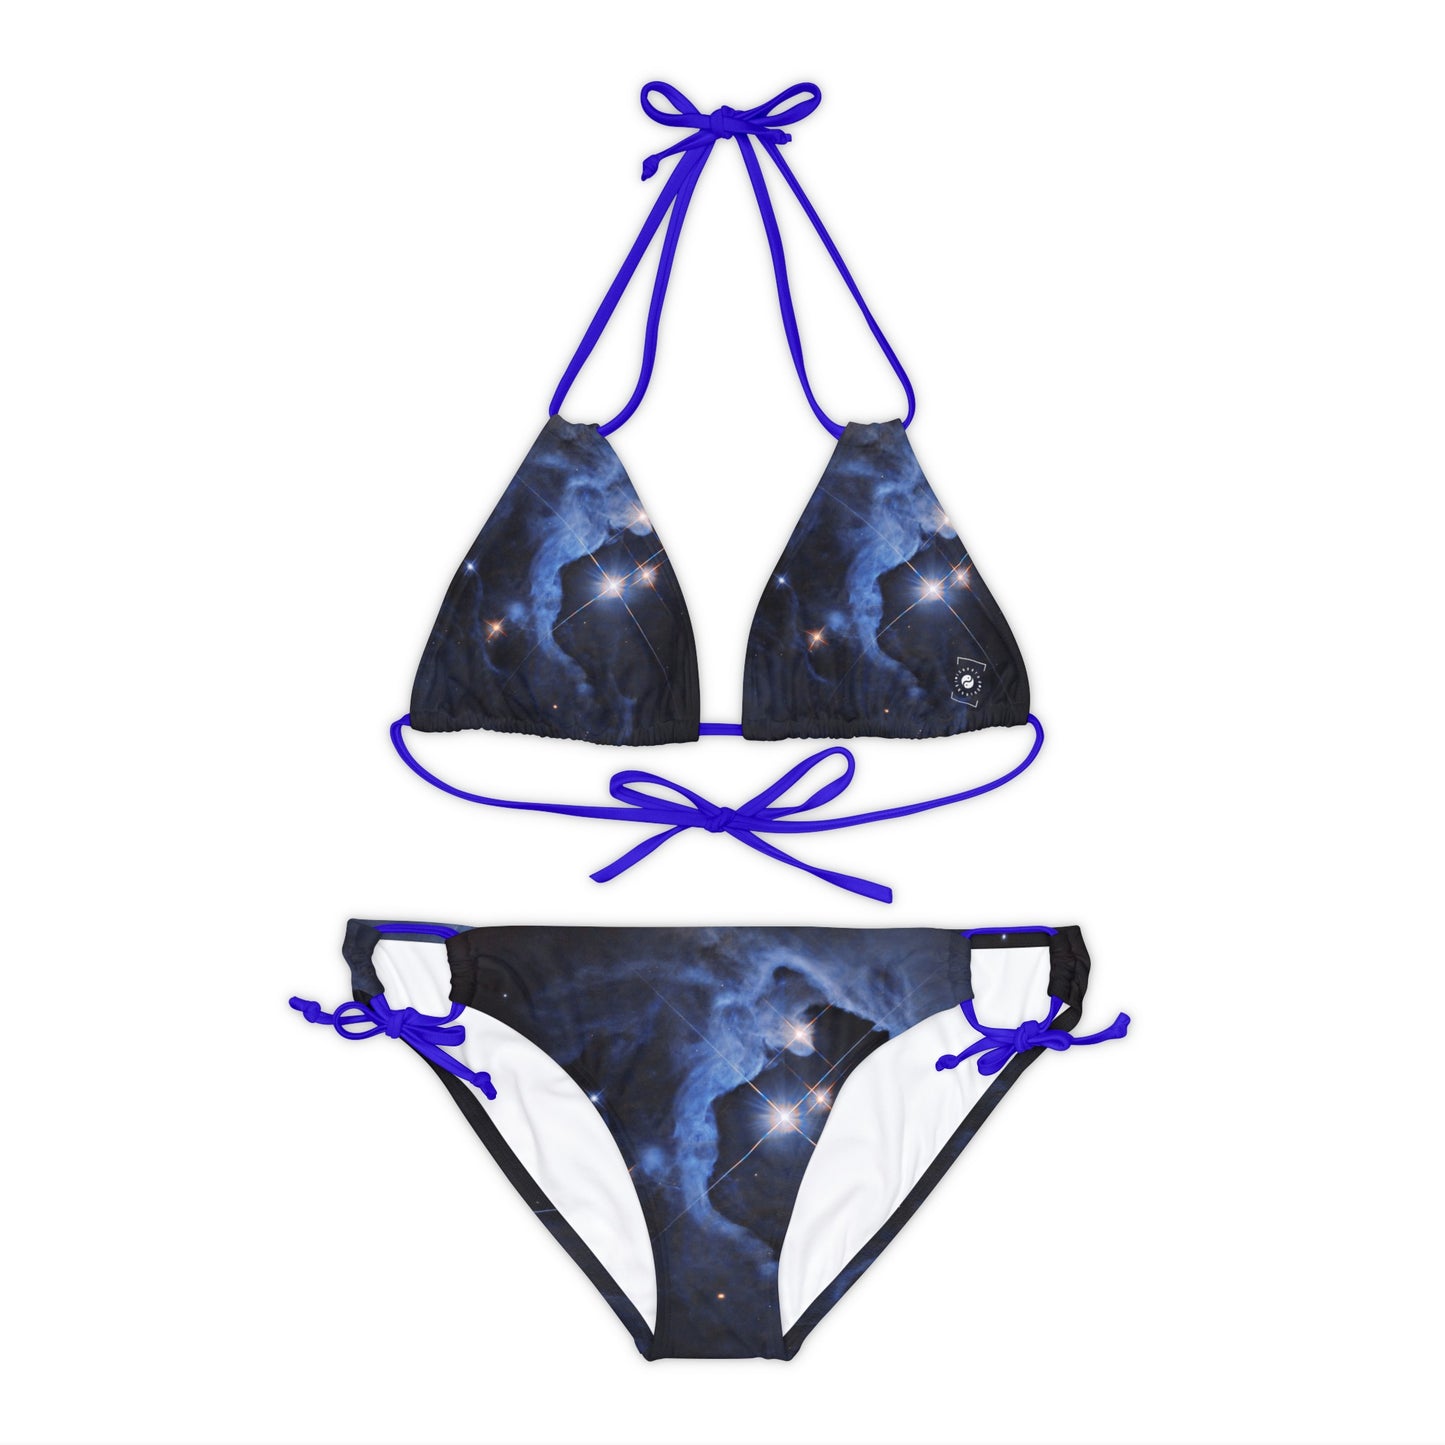 HP Tau, HP Tau G2, and G3 3 star system captured by Hubble - Lace-up Bikini Set